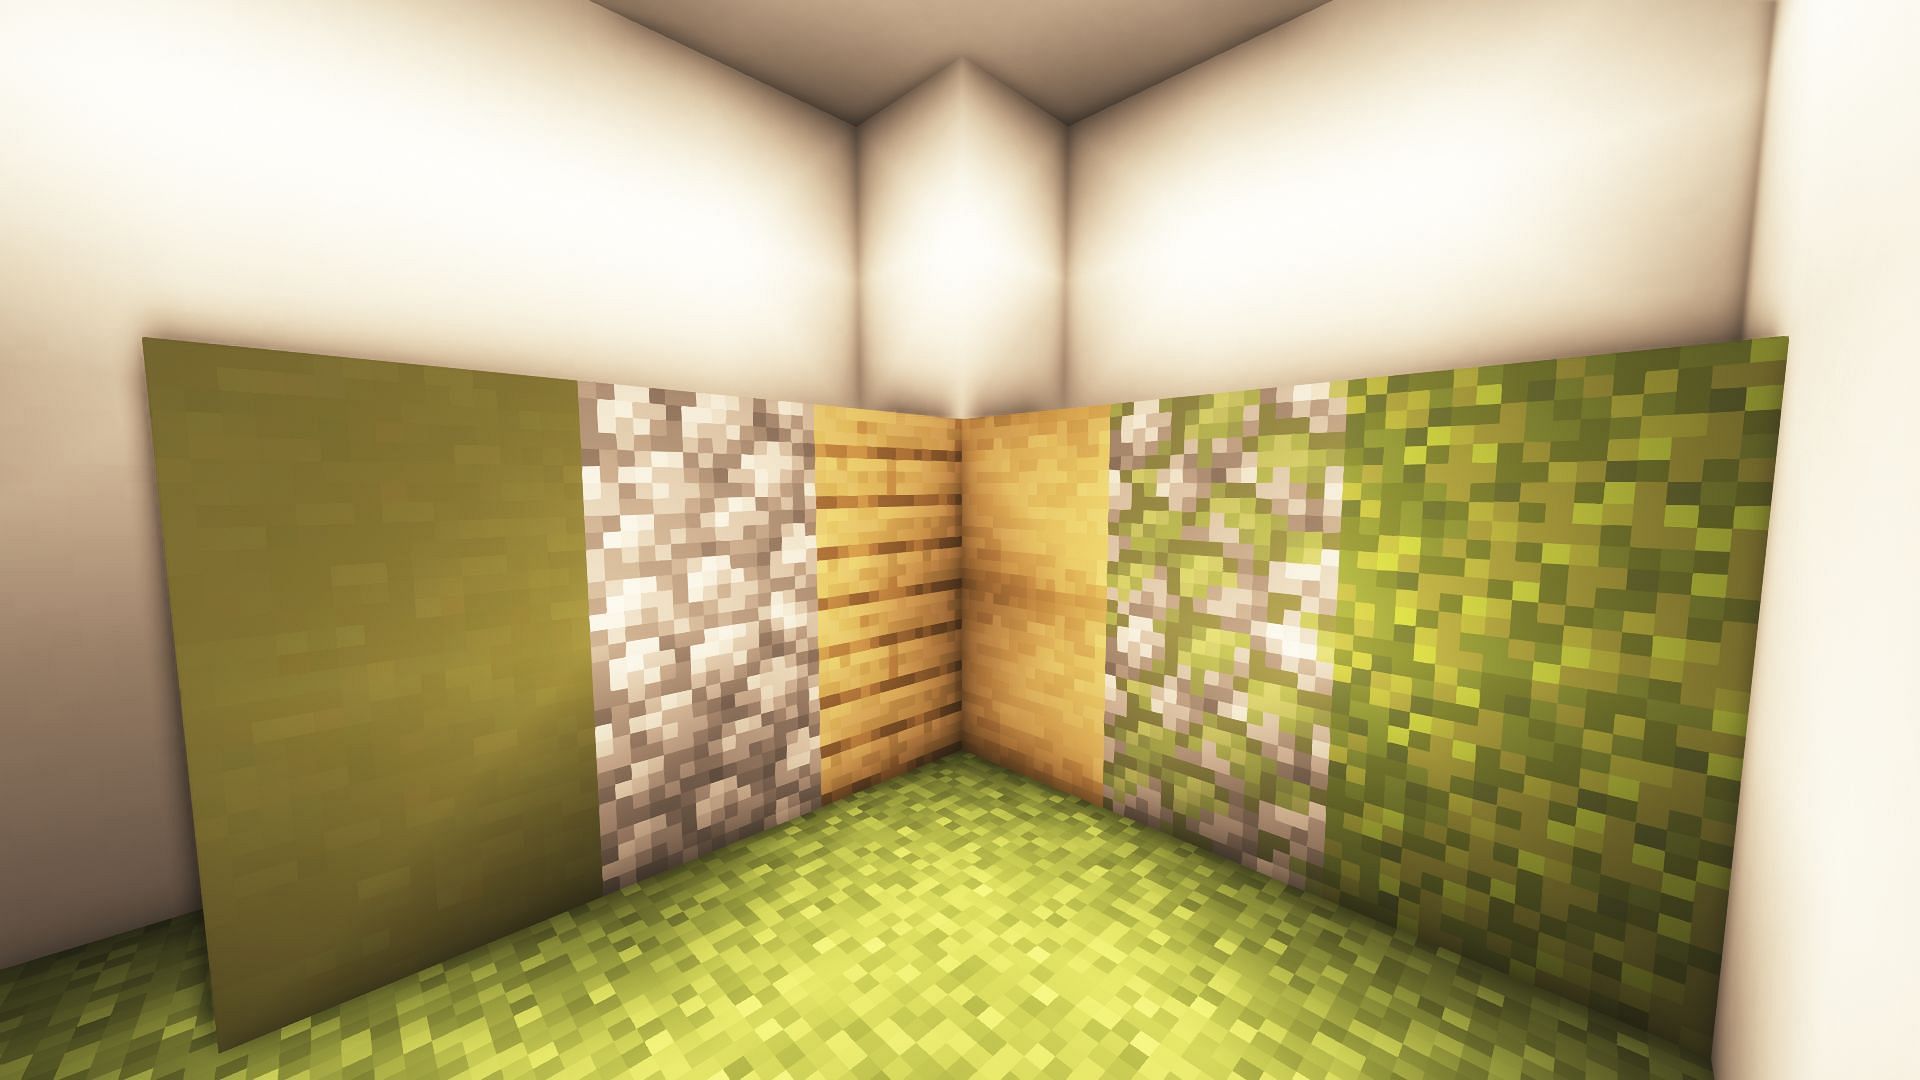 This block palette consists of greenish, stony, and woody blocks in Minecraft (Image via Mojang)